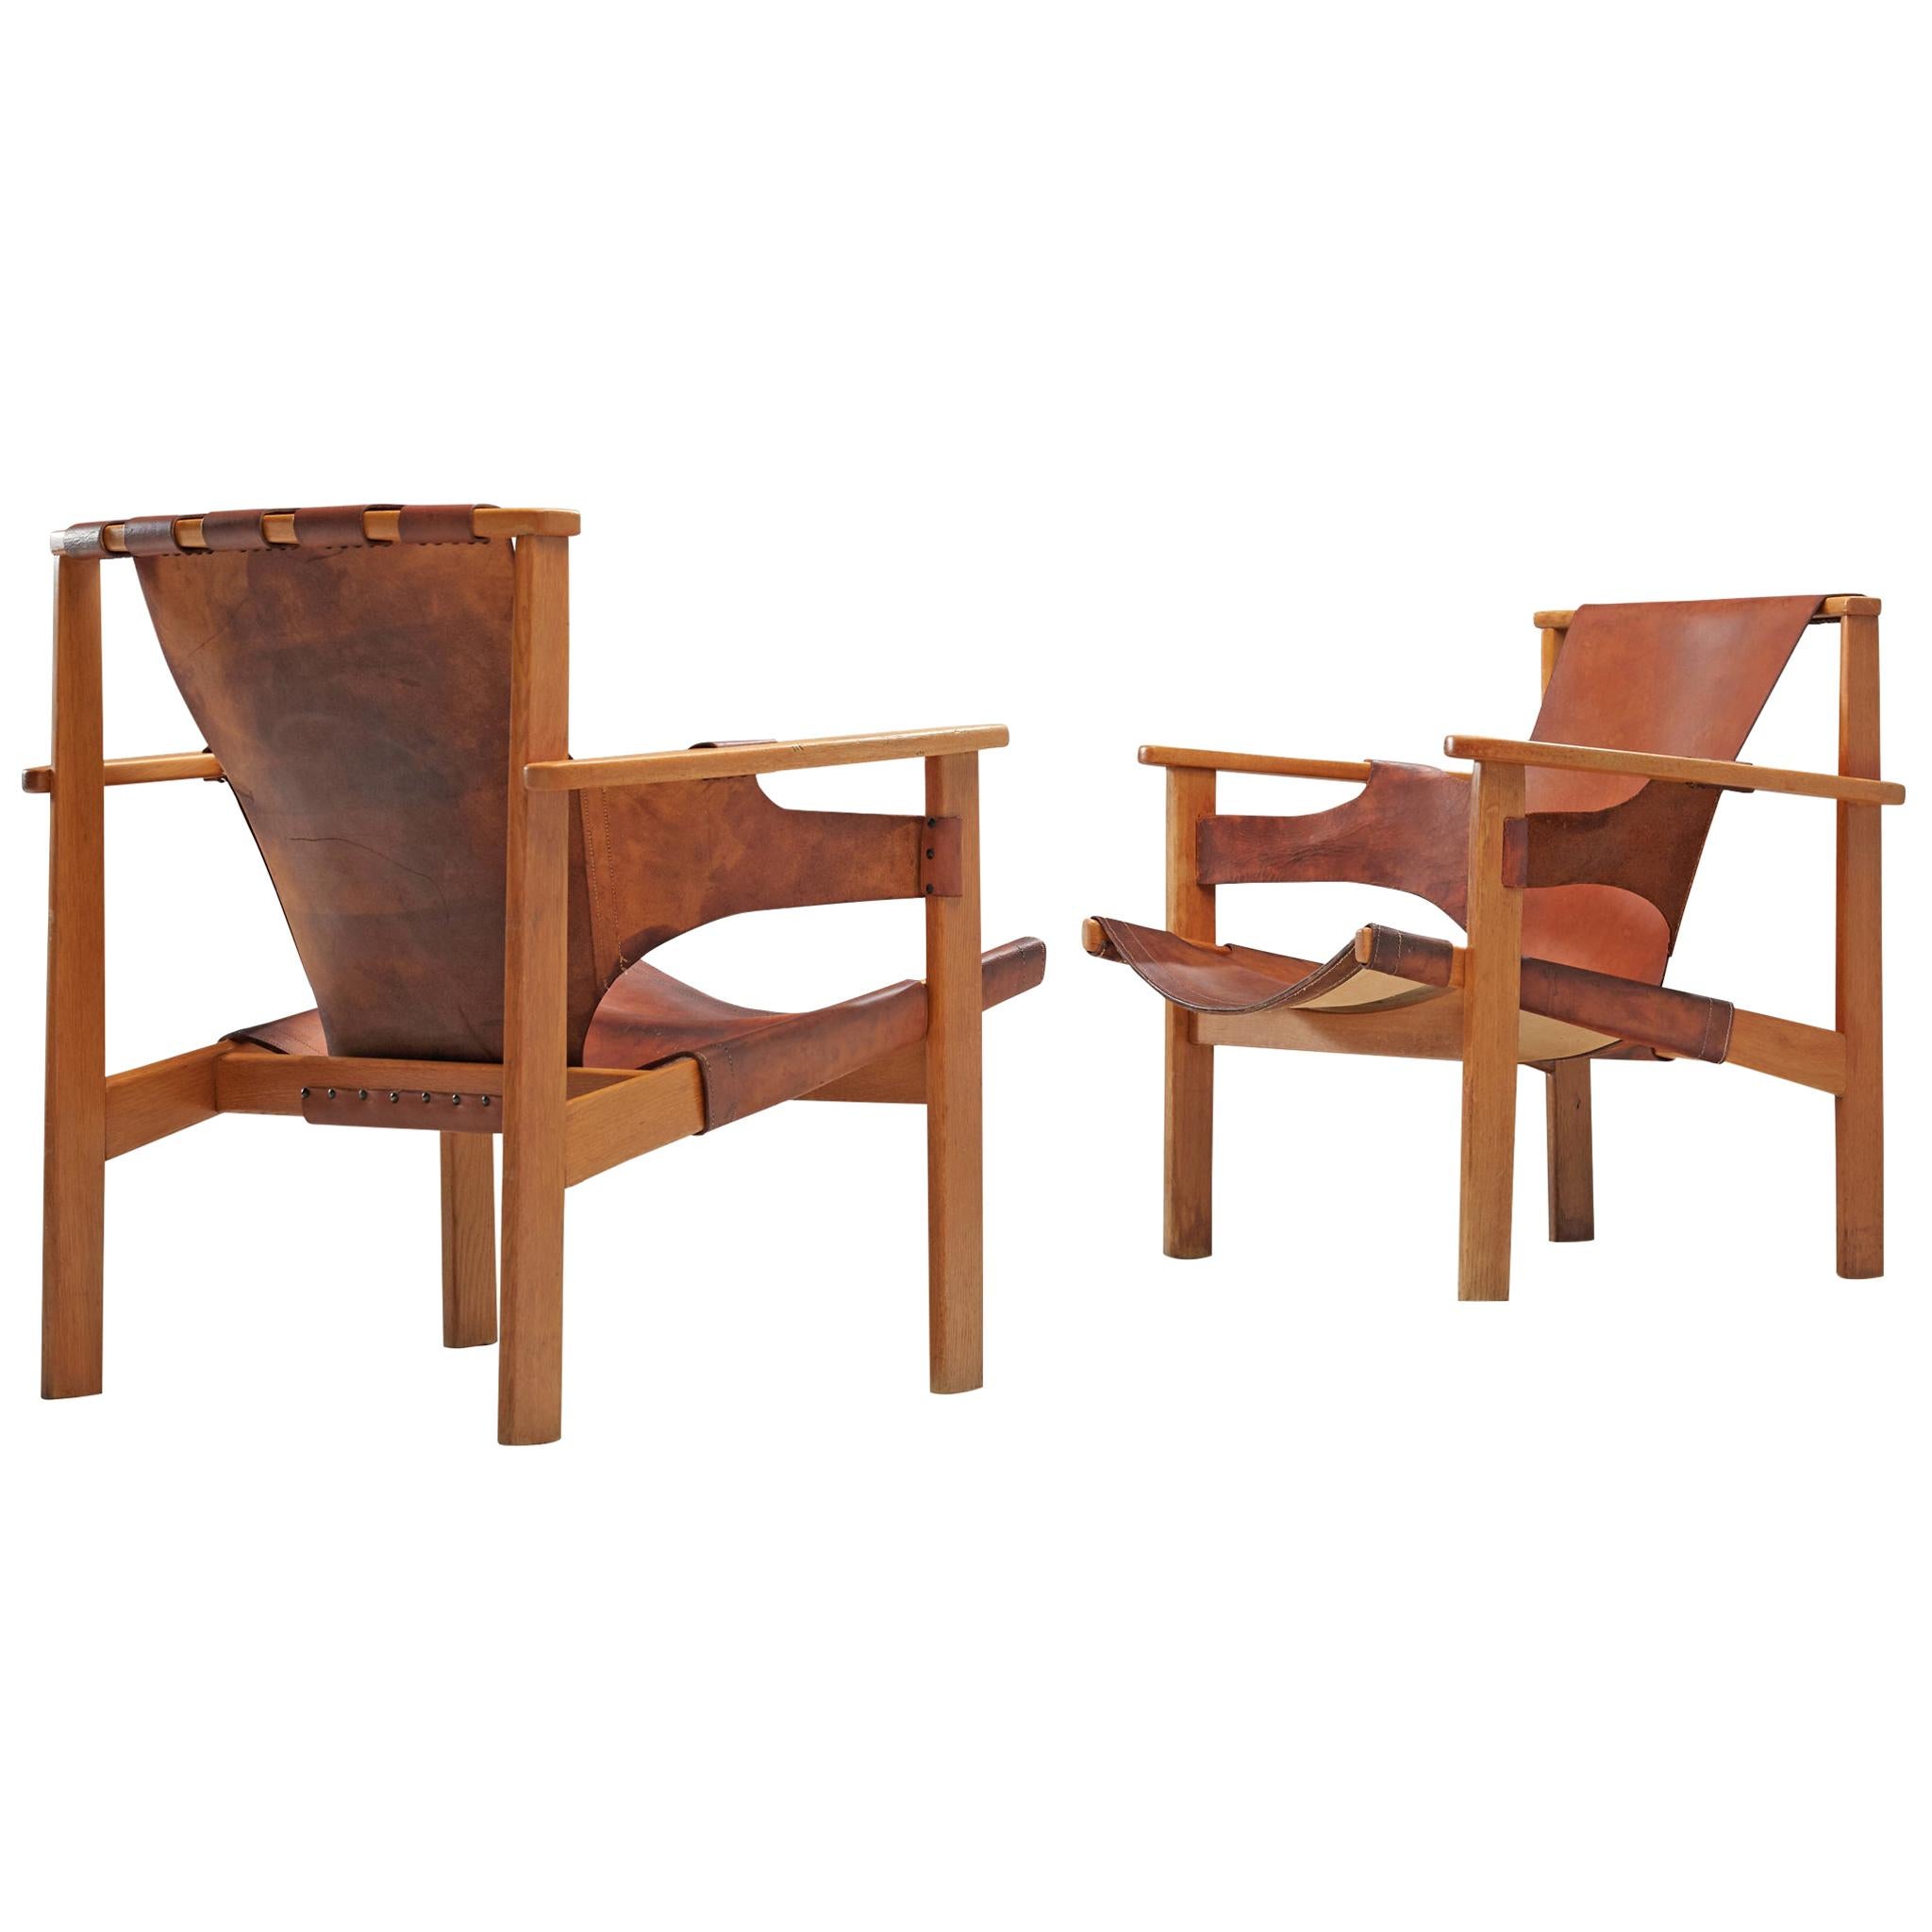 Carl Axel Acking 'Trienna' Chairs in Patinated Brown Leather